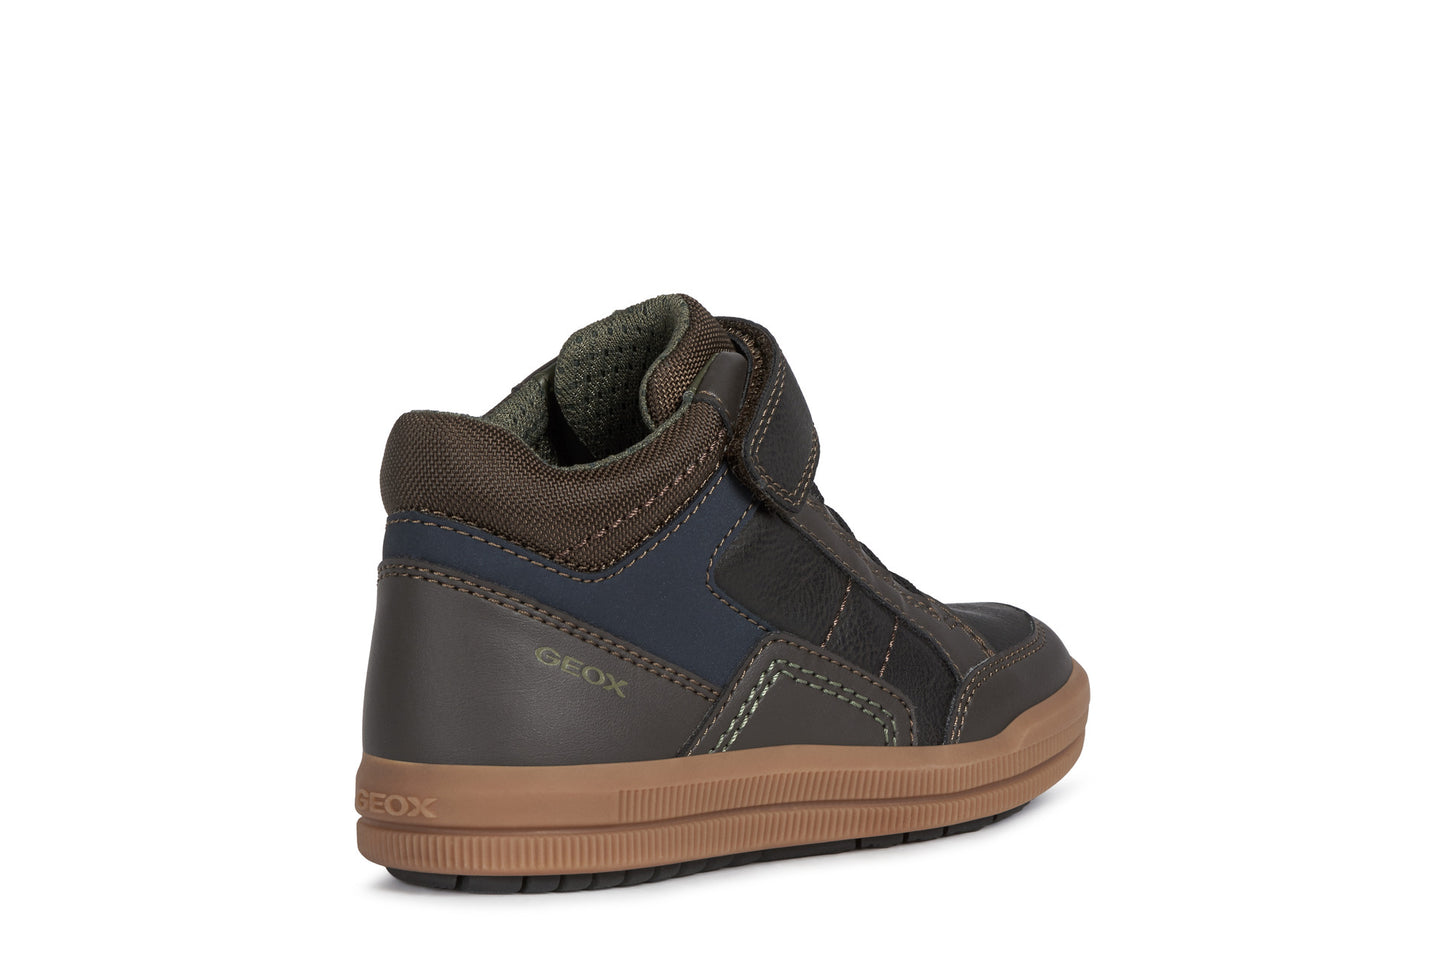 Arzach High-Top Leather Sneaker in Brown/Navy